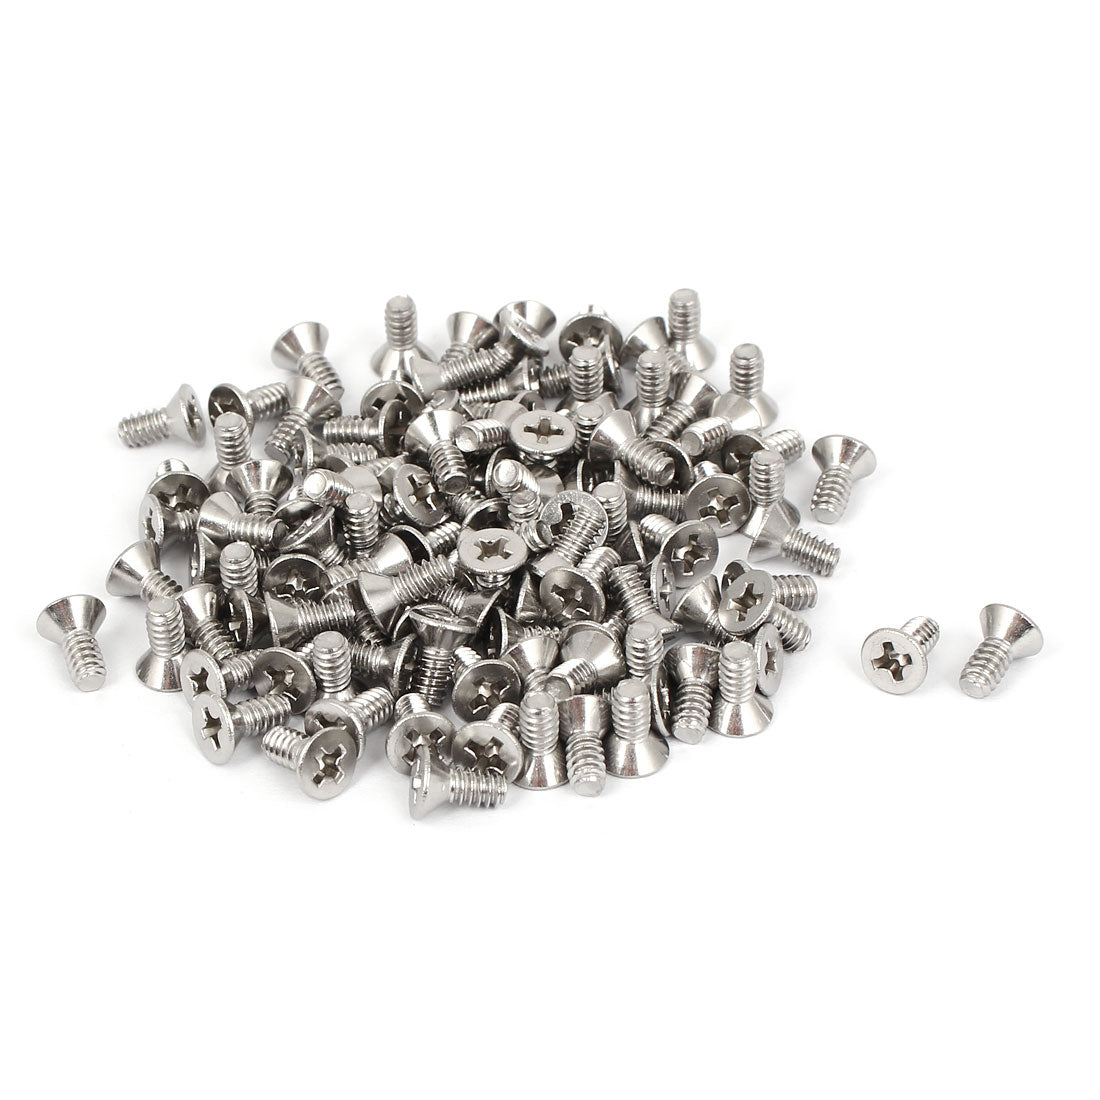 uxcell Uxcell 6#-32*5/16" Phillips Flat Countersunk Head Screws 100pcs